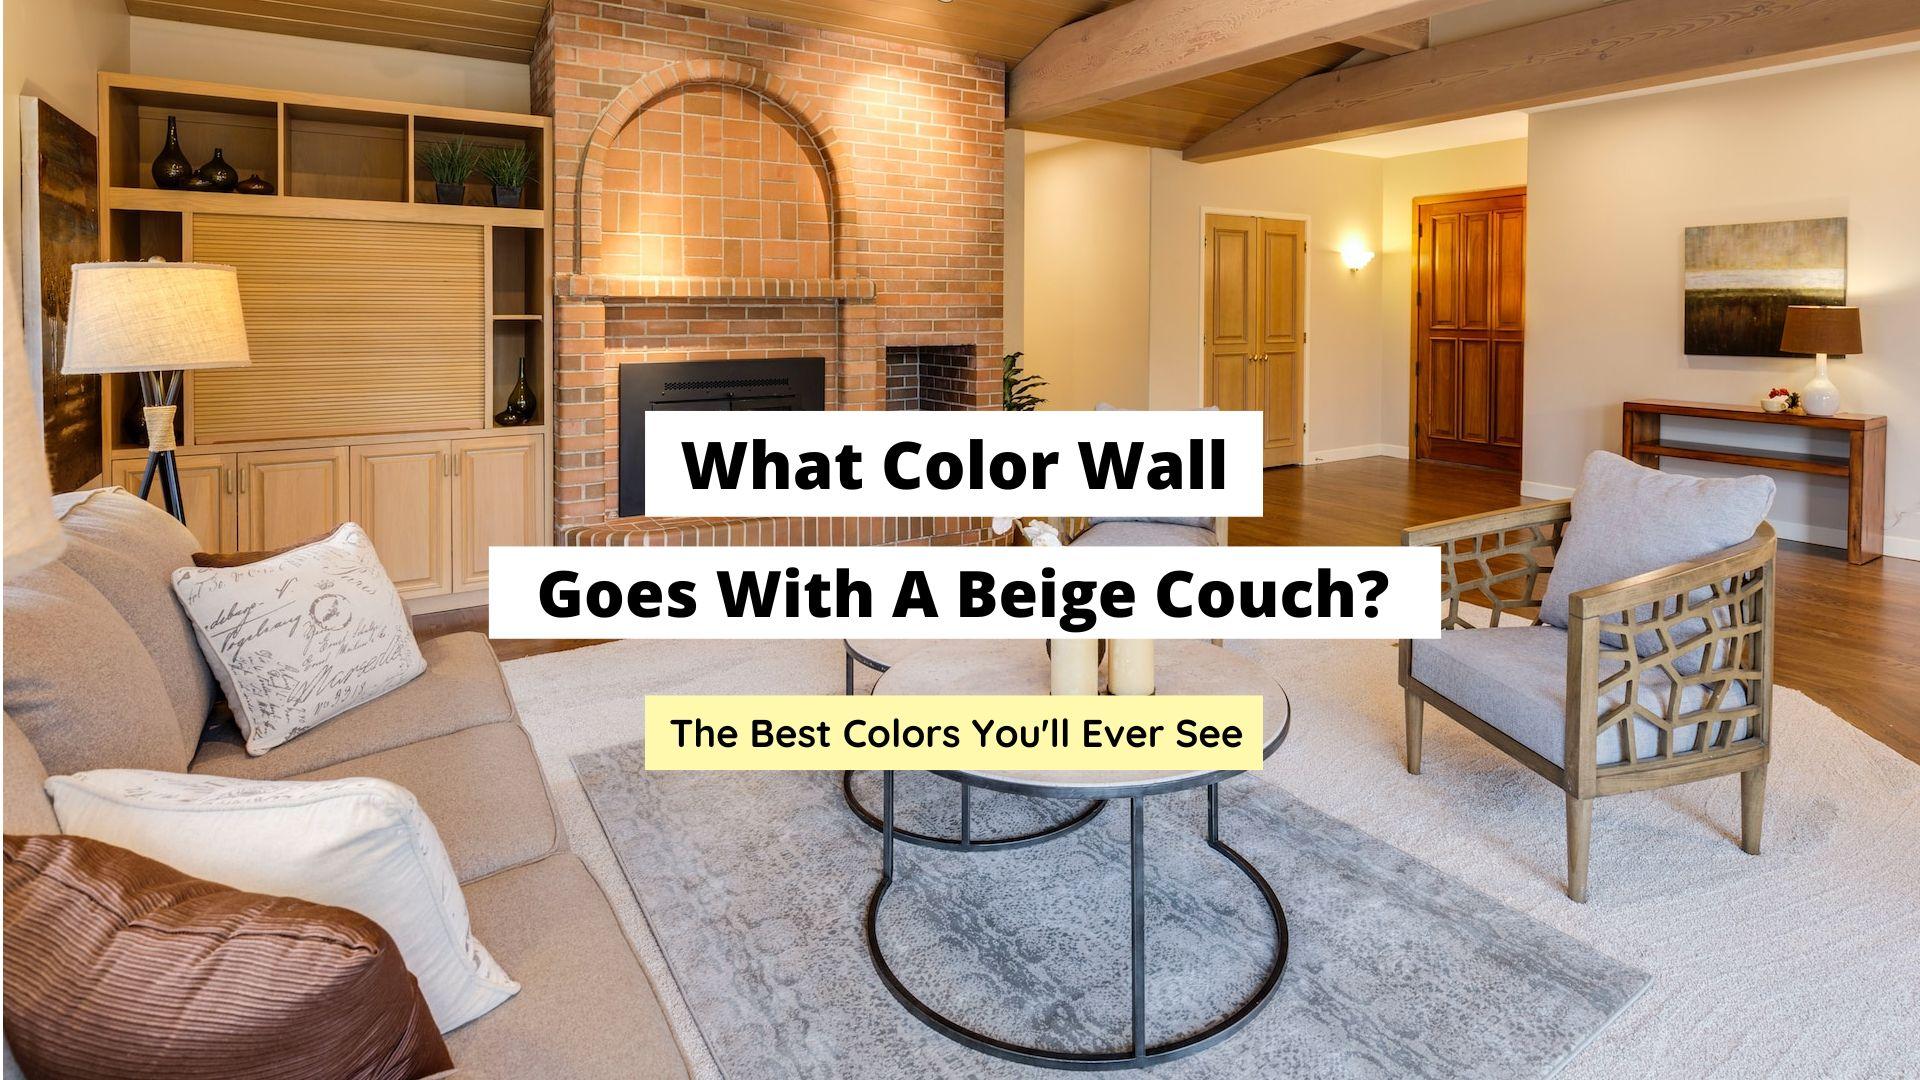 What Color Wall Goes With A Beige Couch